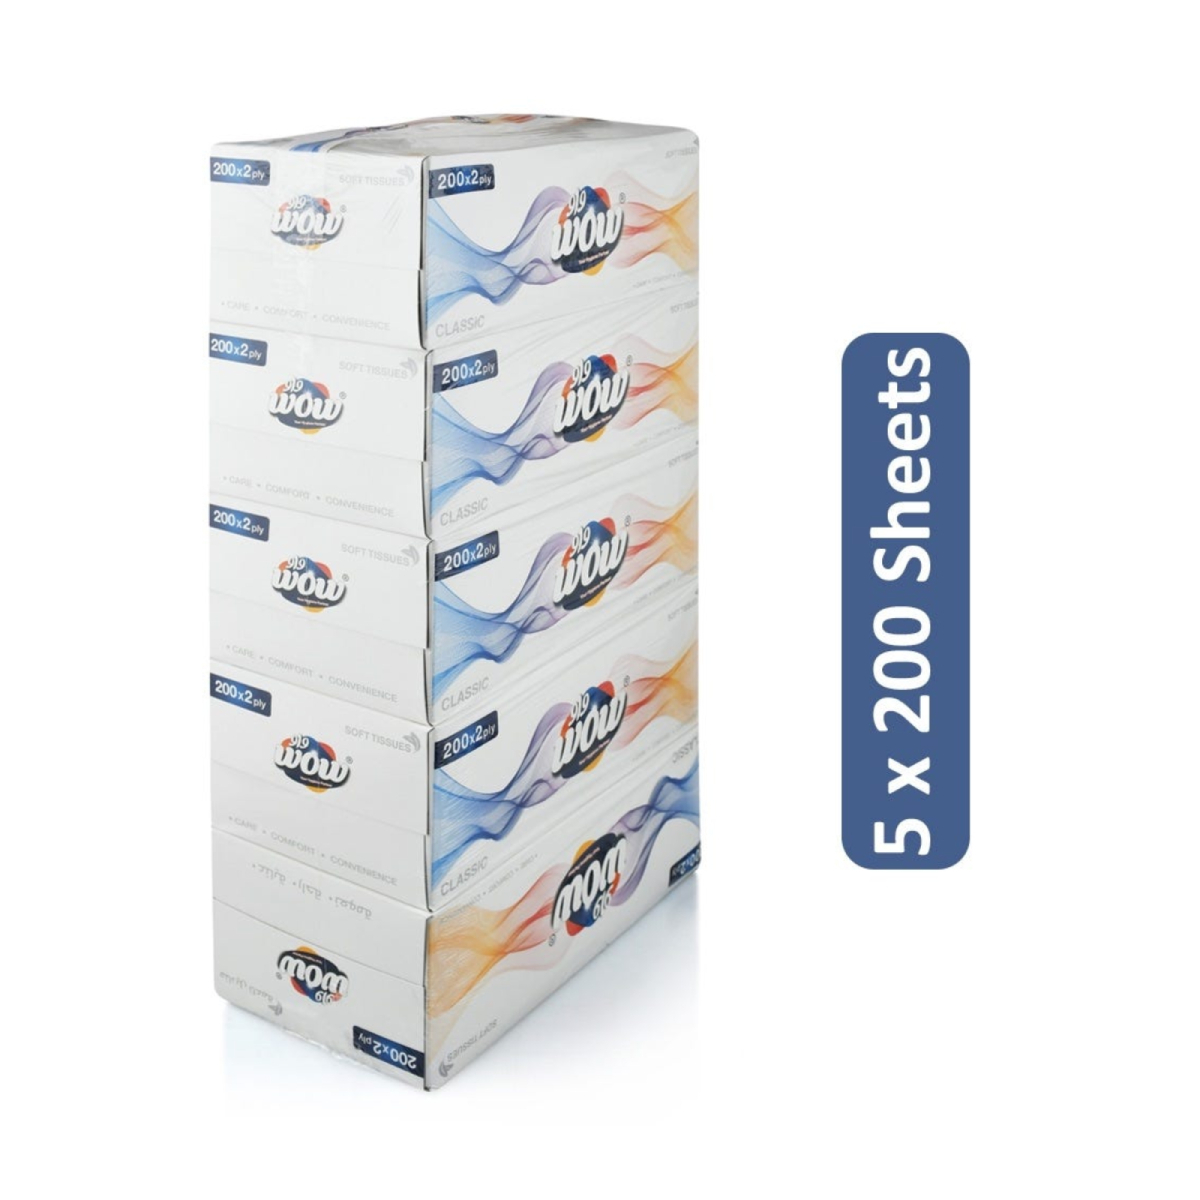 Wow Classic Facial Tissue 2ply 5 x 200 Sheets